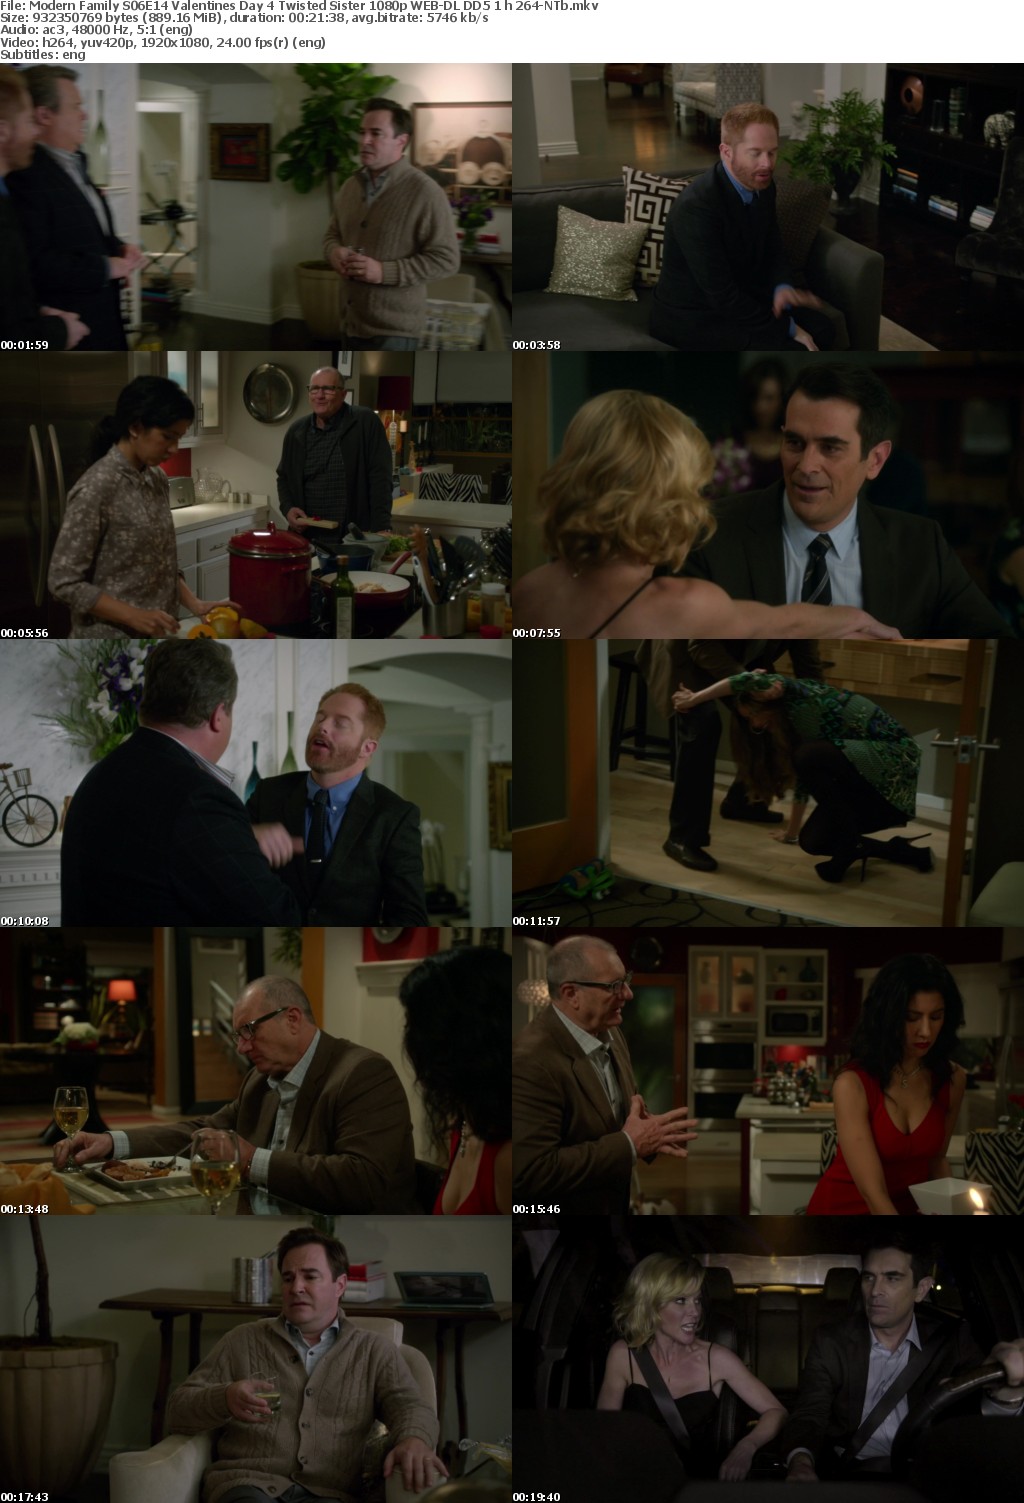 Modern Family S06E14 Valentines Day 4 Twisted Sister 1080p WEB-DL DD5 1 h 264-NTb